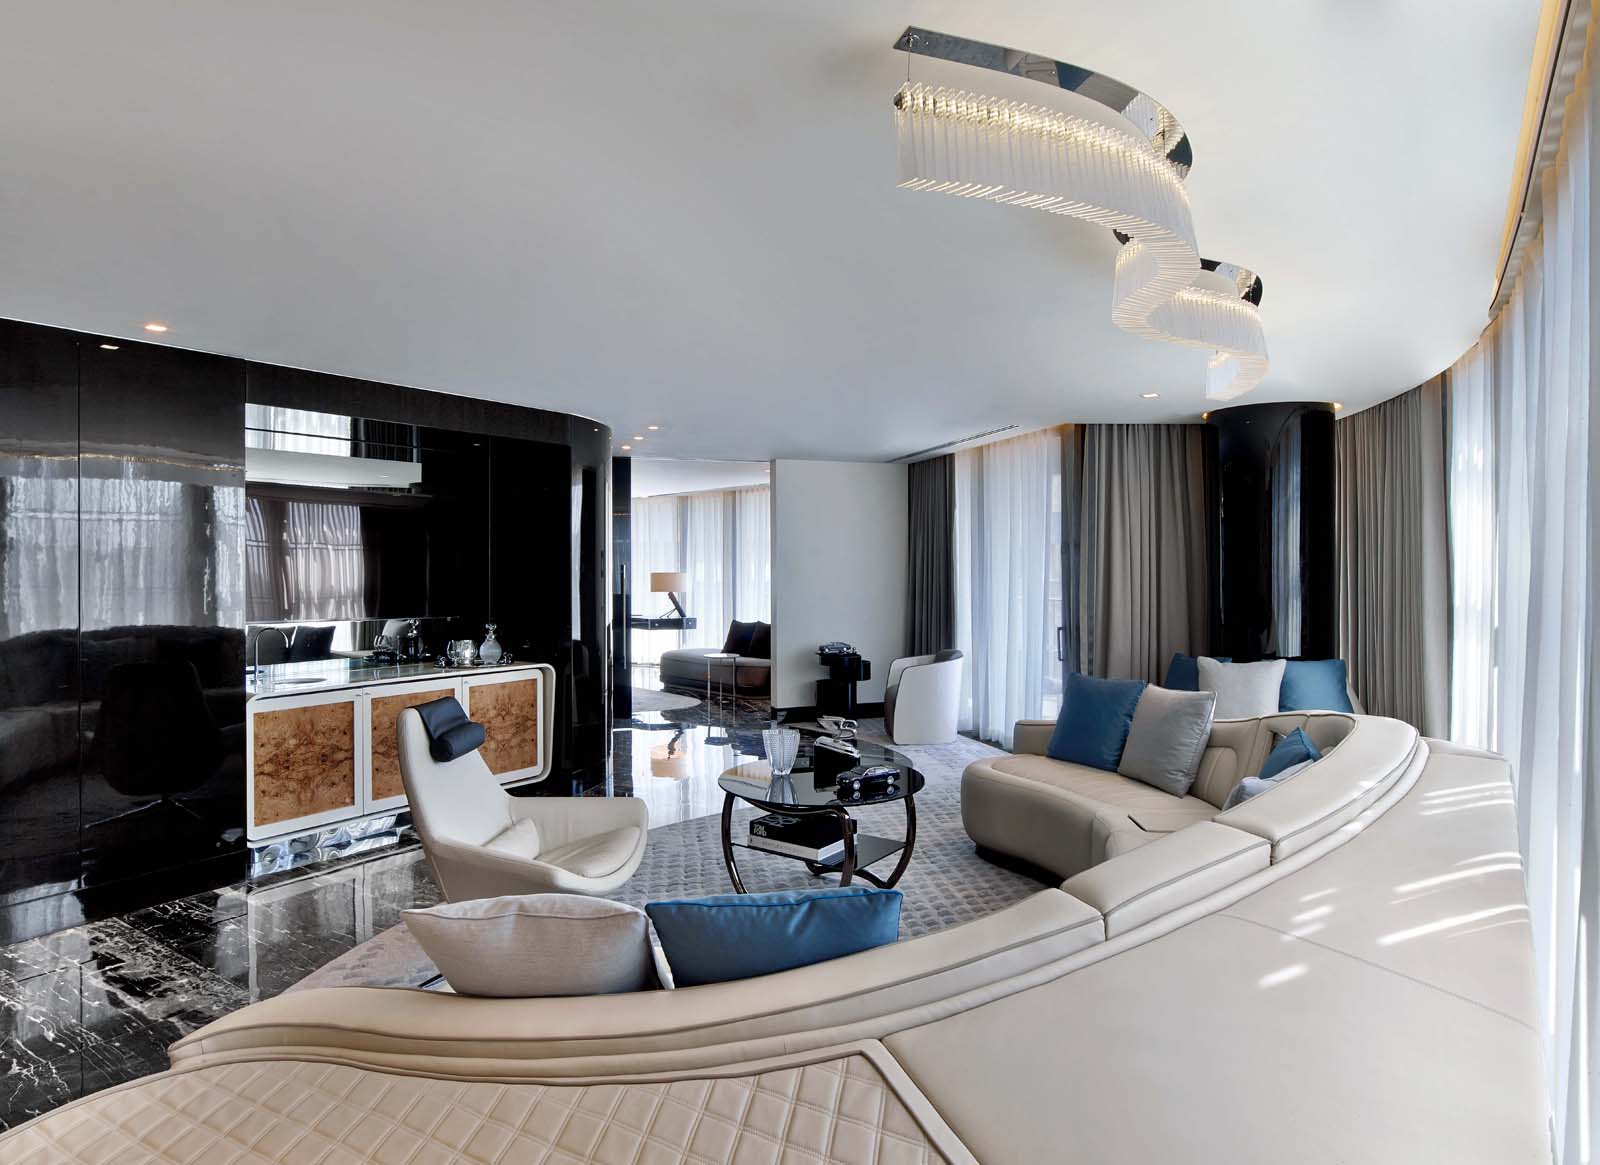 new-bentley-suite-debuts-at-the-st-regis-istanbul12